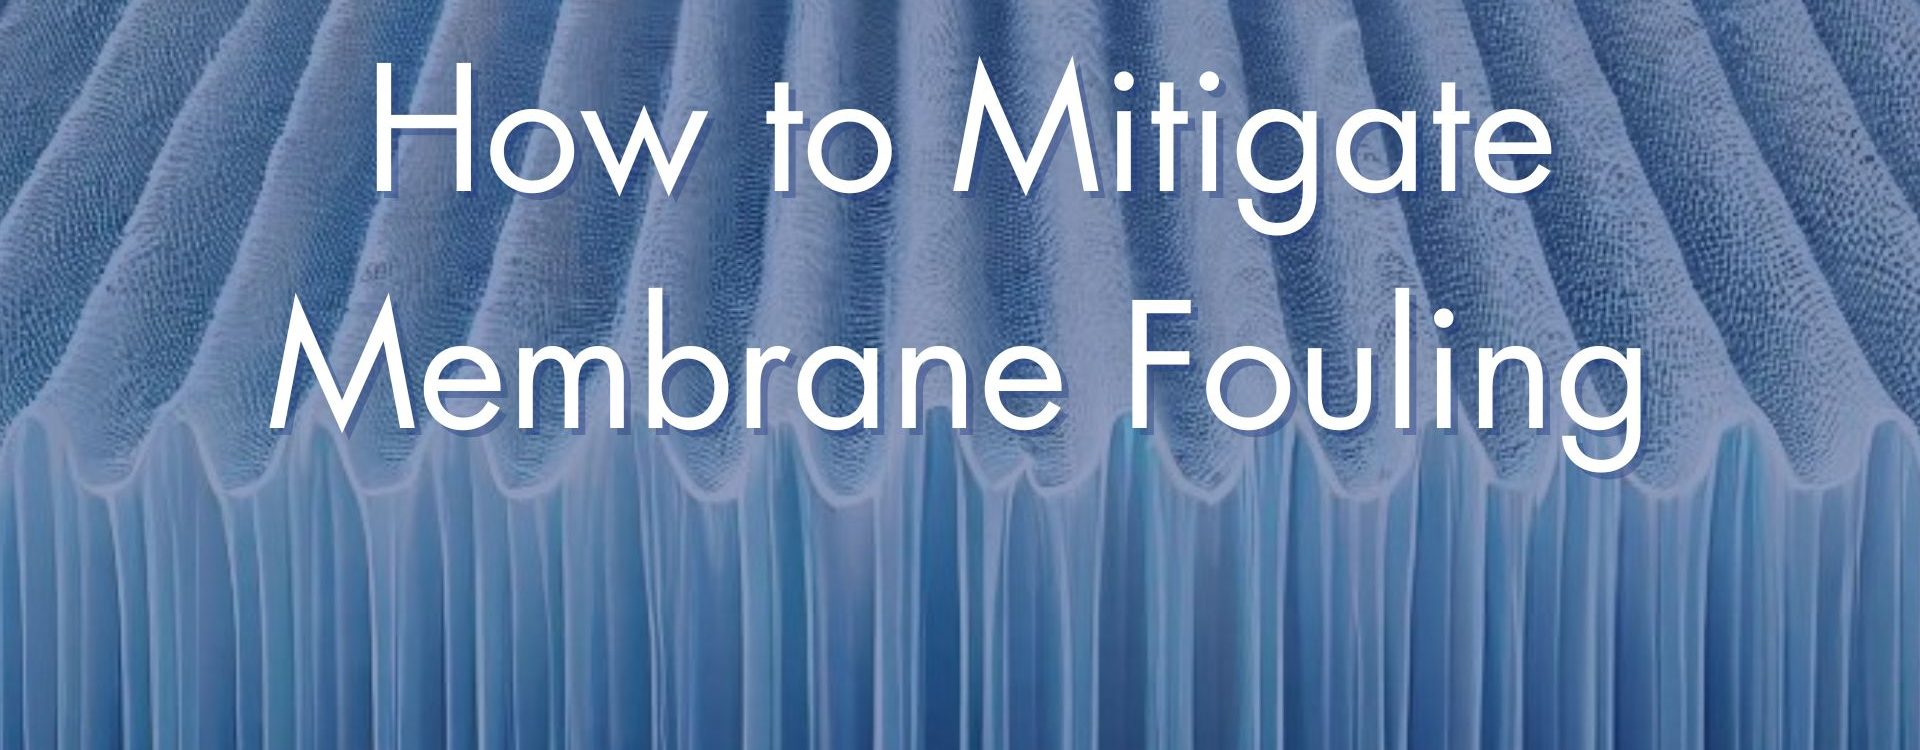 how to mitigate fouling